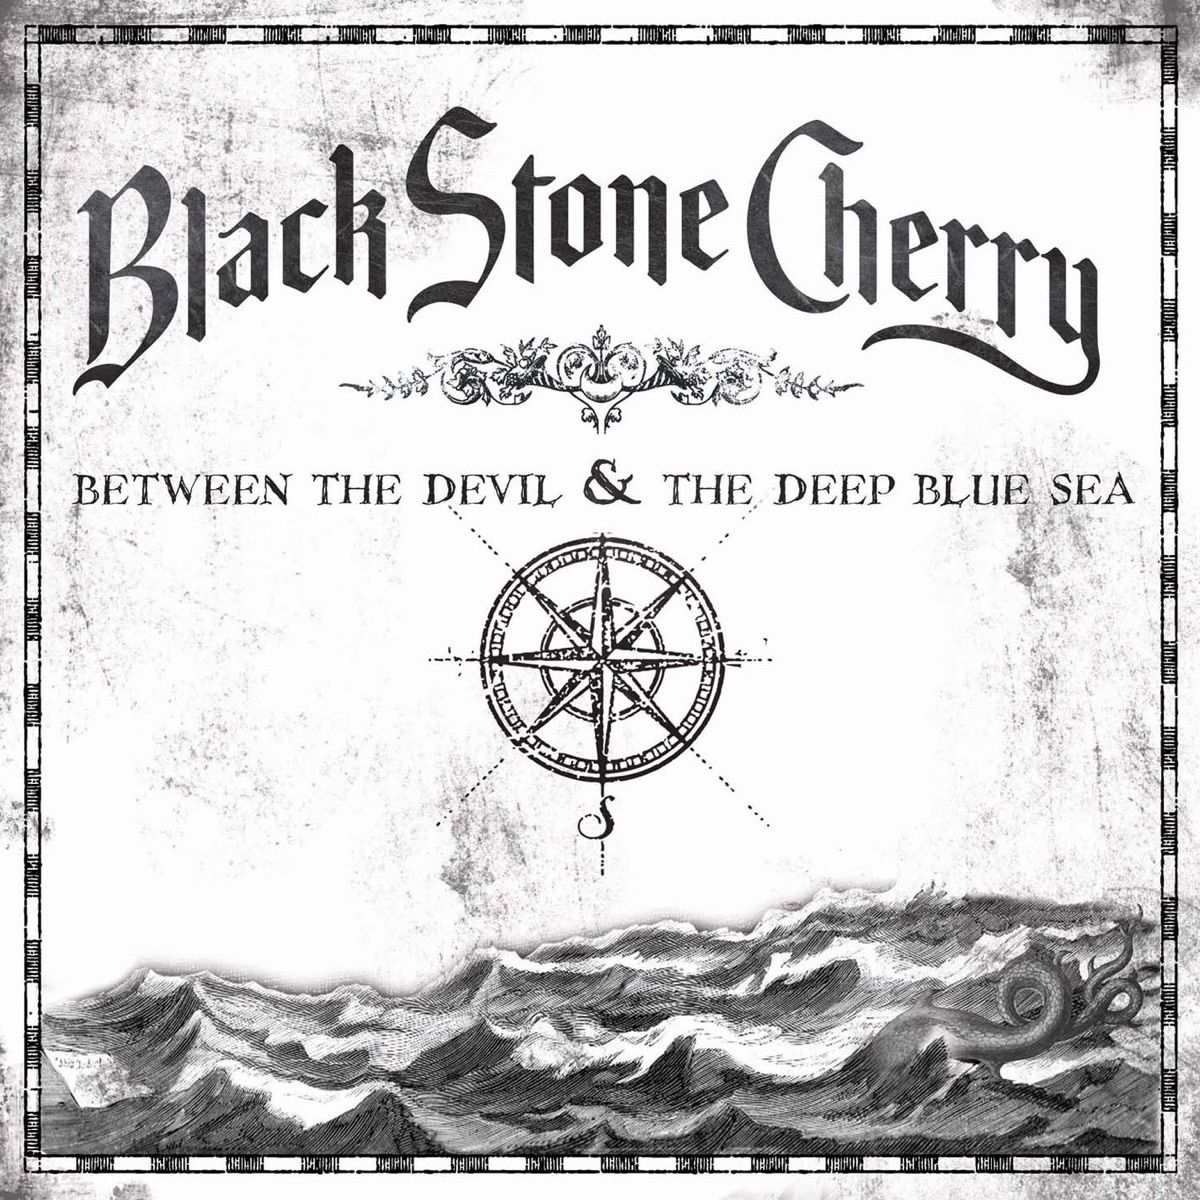 Black Stone Cherry - Between The Devil And The Deep Blue Sea